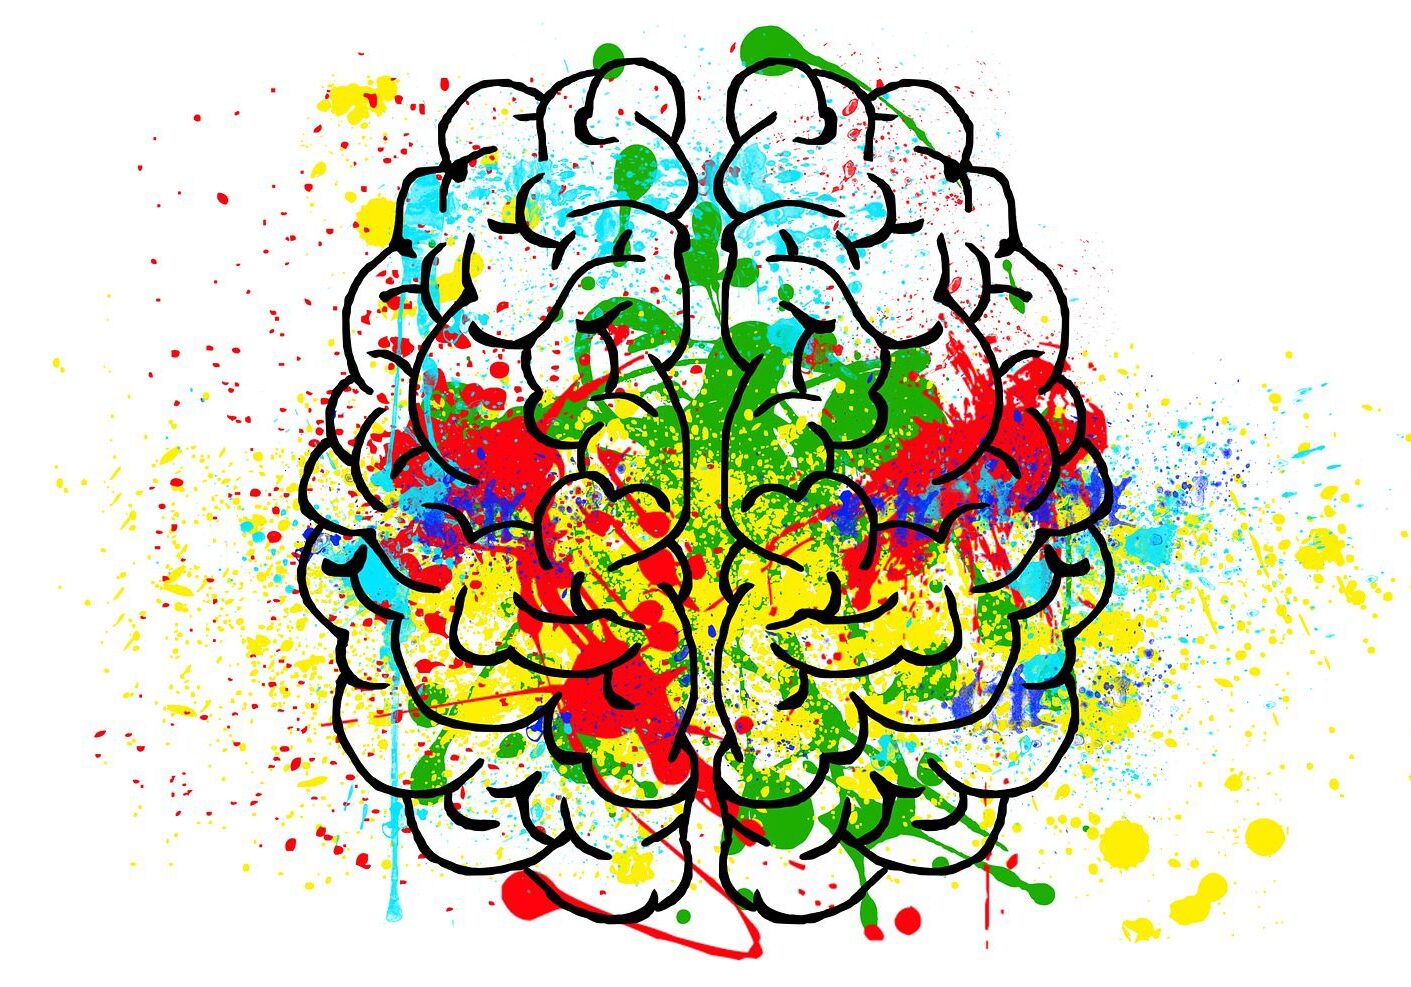 A drawing of a colorful brain with paint splashing all over it.